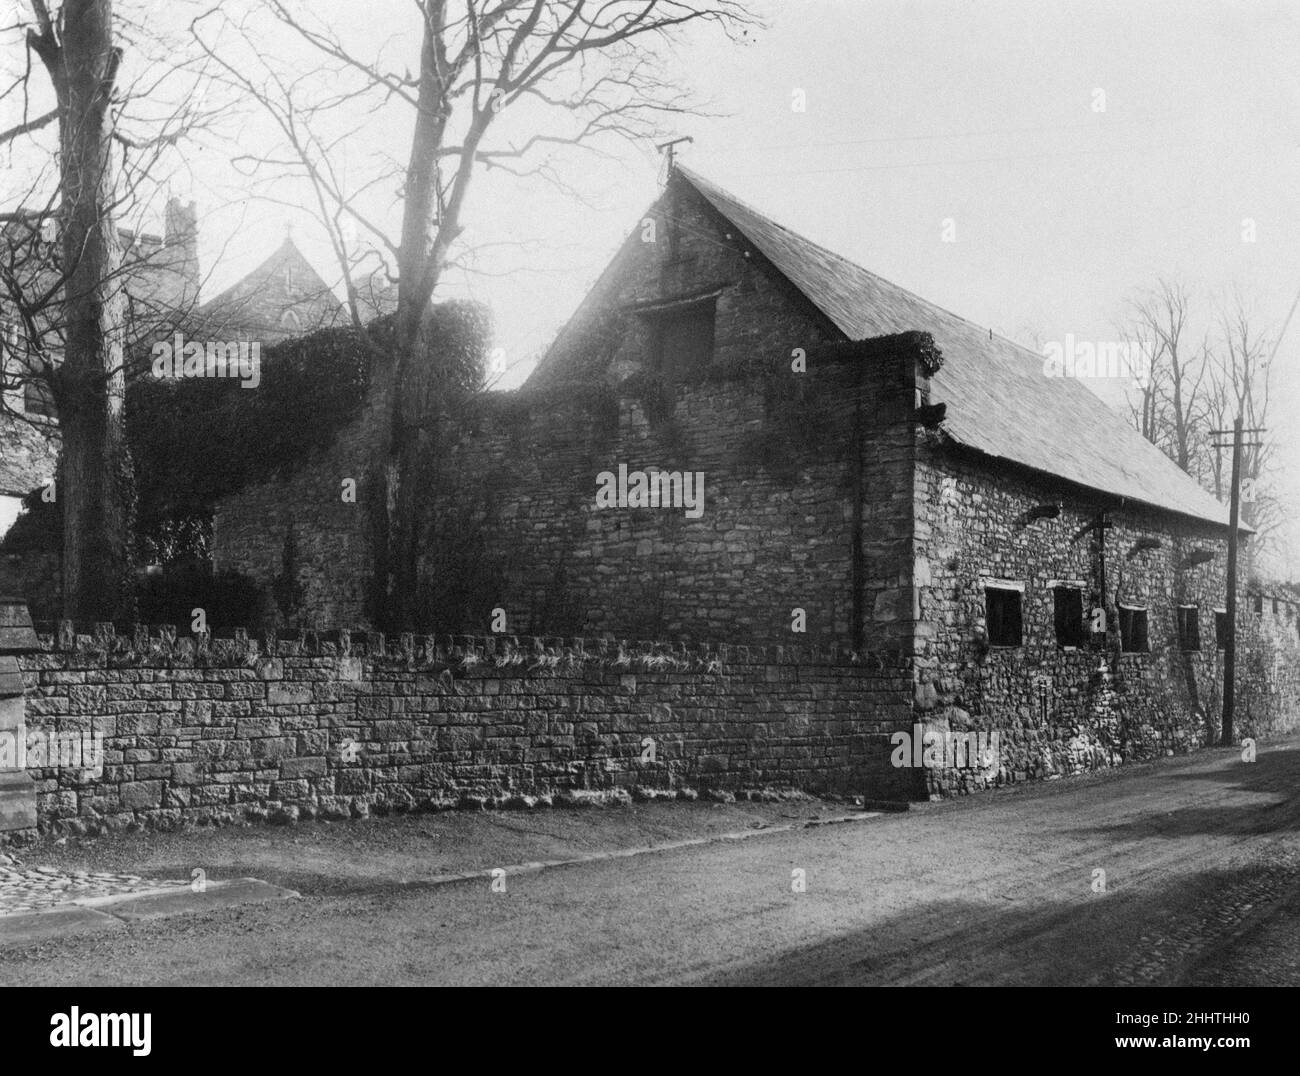 Tithe Barn, Brecon, a market town and community in Powys, Mid Wales, Circa 1950. Originally, a Tithe Barn housed the tithes (taxes) paid by the local community to Brecon Cathedral. Stock Photo